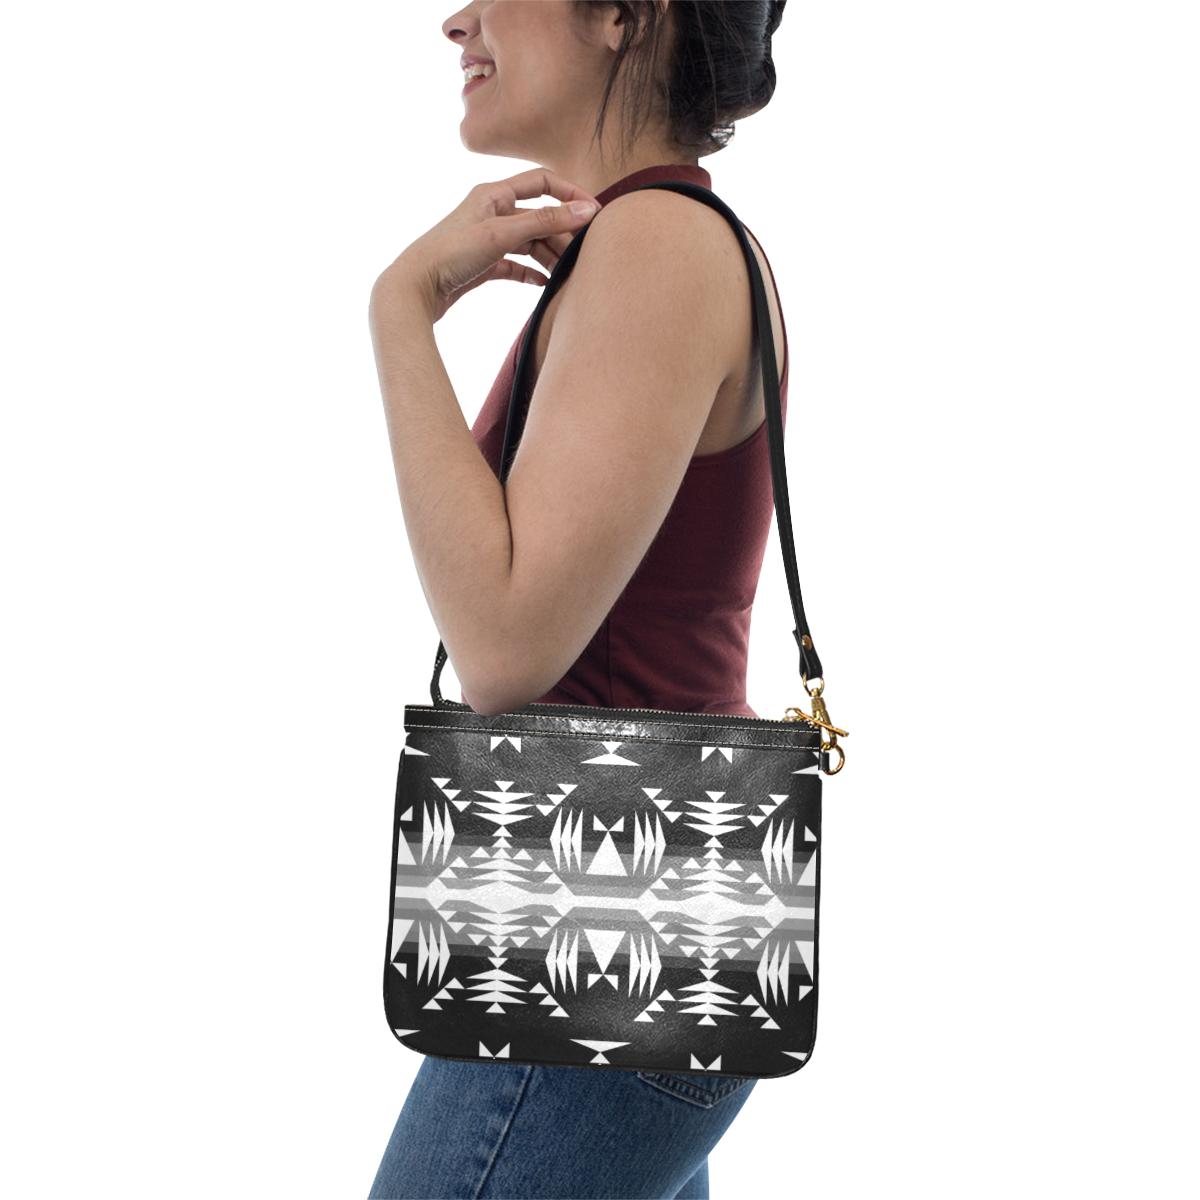 Between the Mountains Black and White Small Shoulder Bag (Model 1710) Small Shoulder Bag (1710) e-joyer 